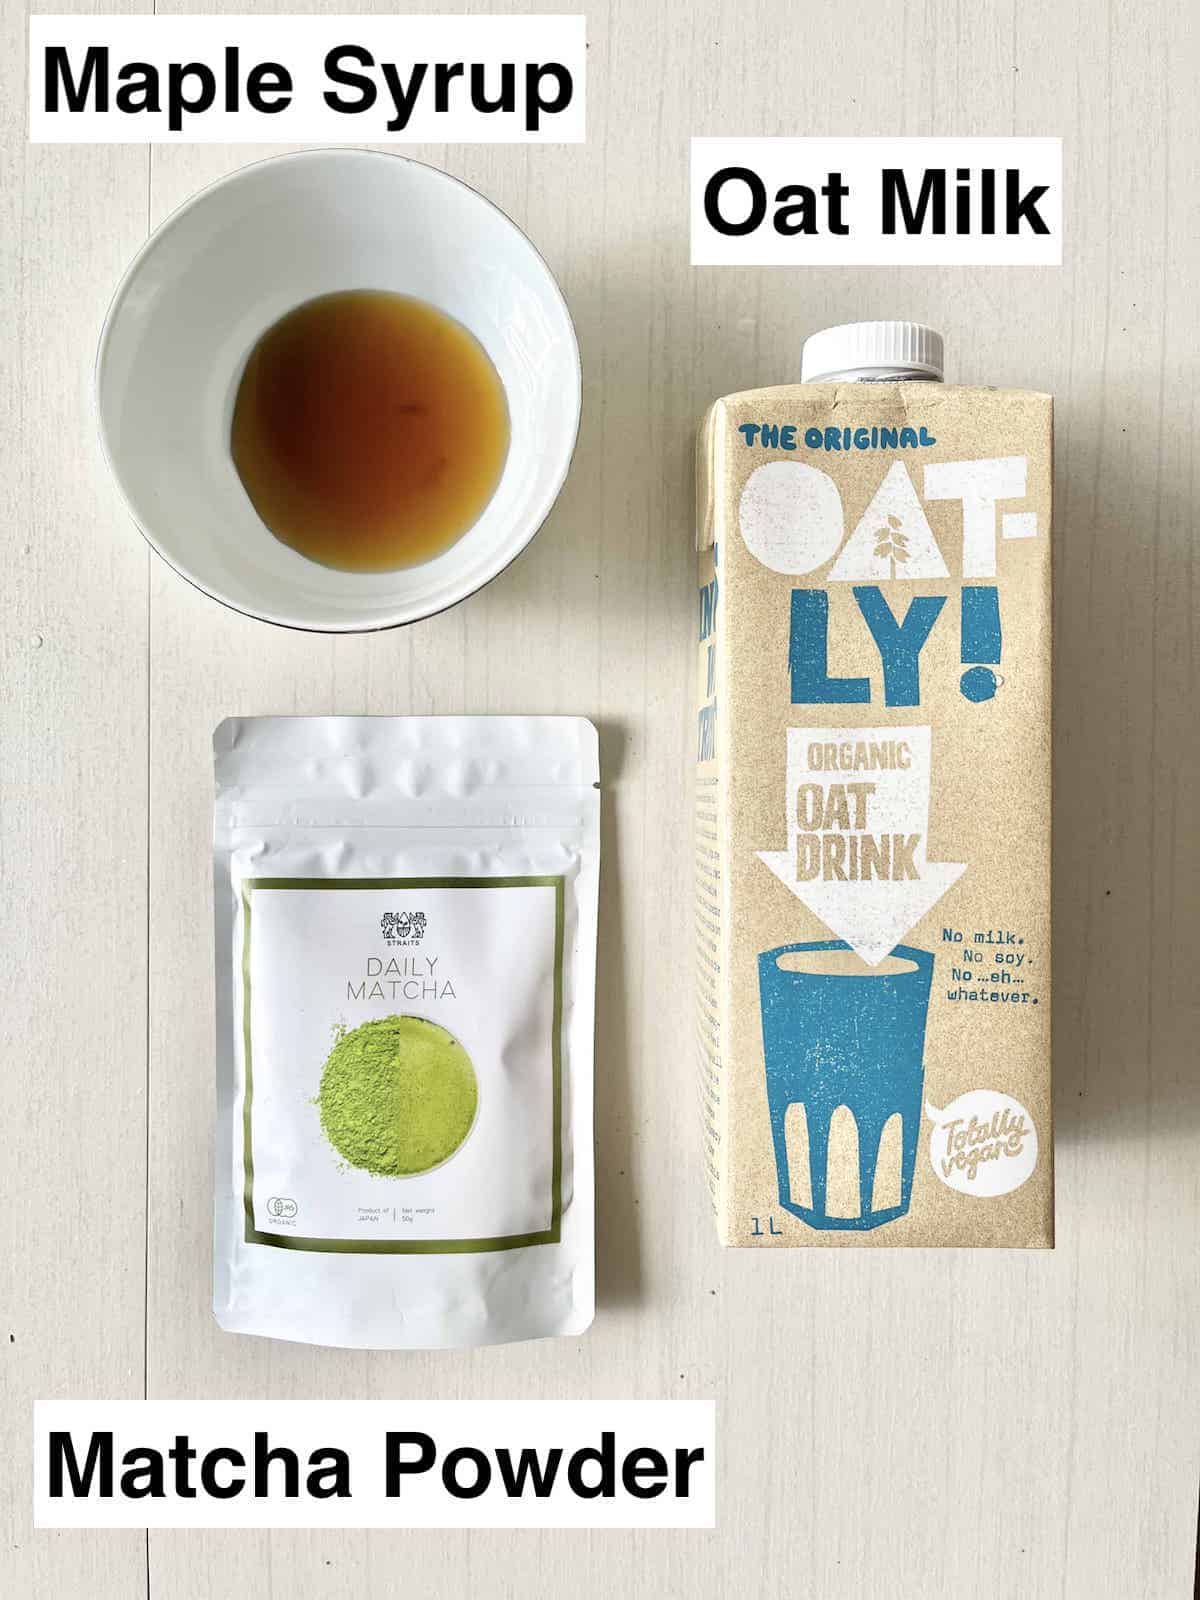 A carton of oat milk, a bowl of maple syrup and a packet of matcha powder.